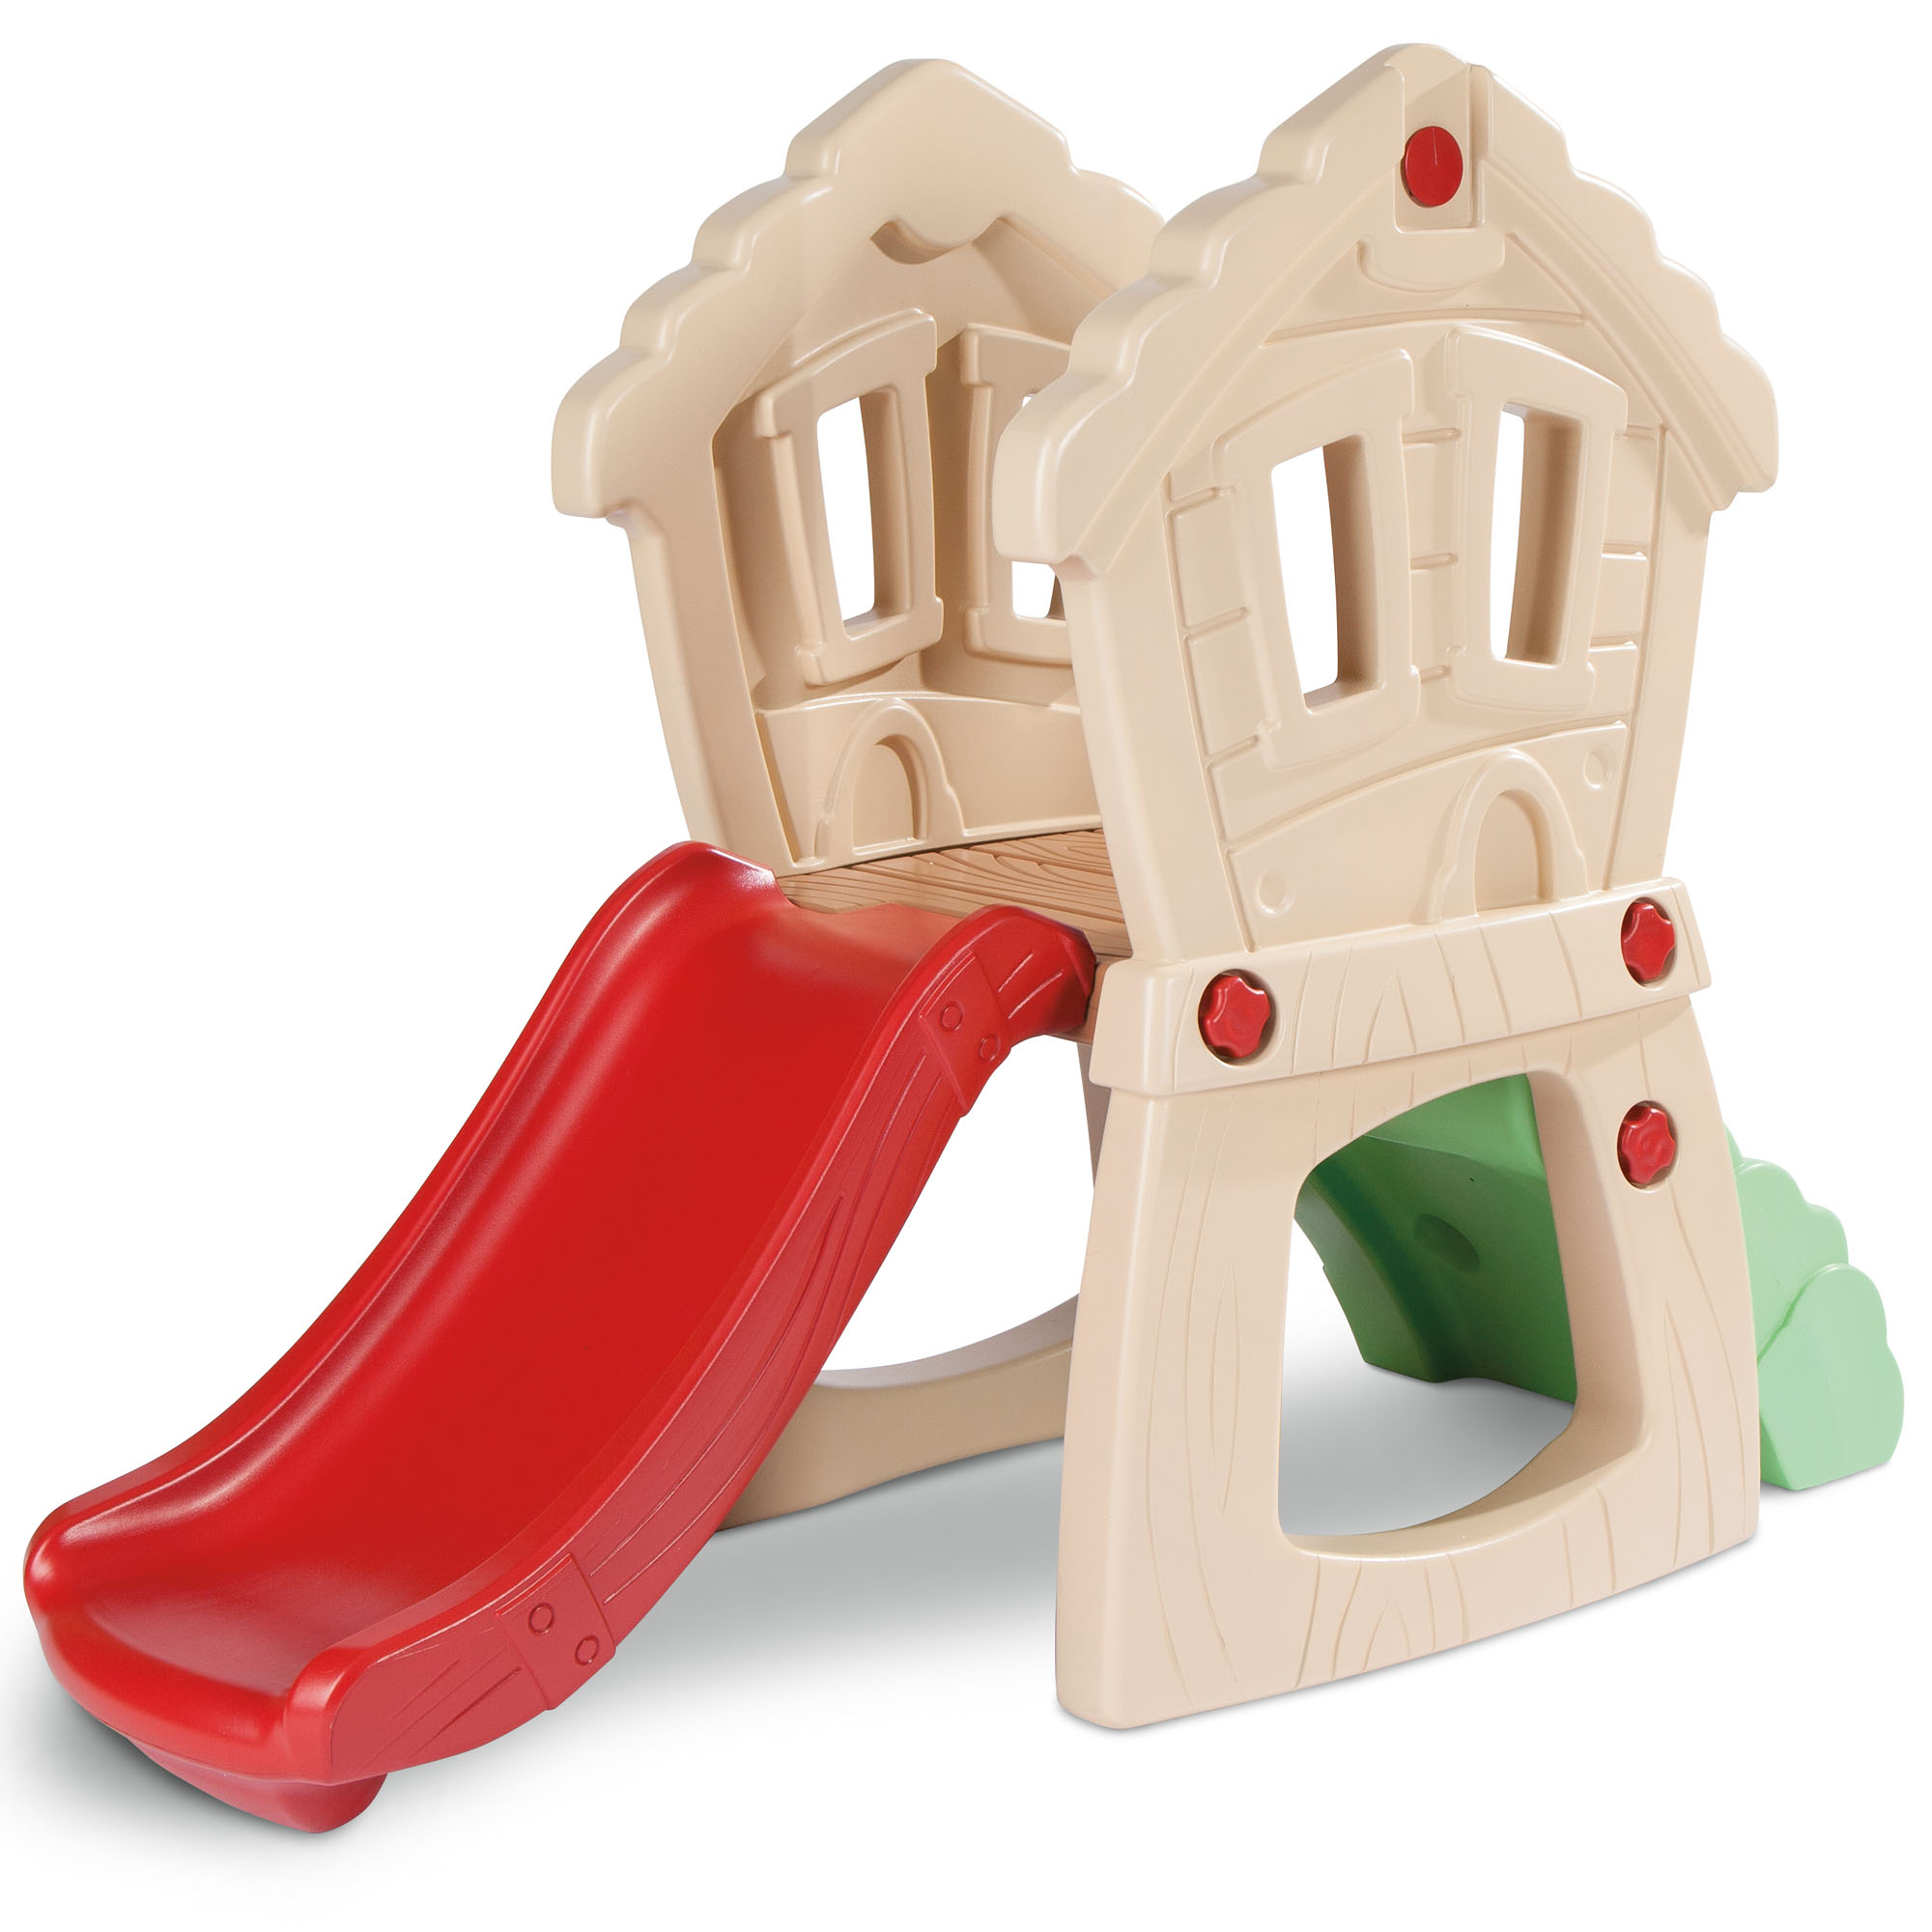 Little Tikes Hide & Seek Climber, Indoor Outdoor Slide and Climbing Playset for Kids Ages 2-5 - image 3 of 6